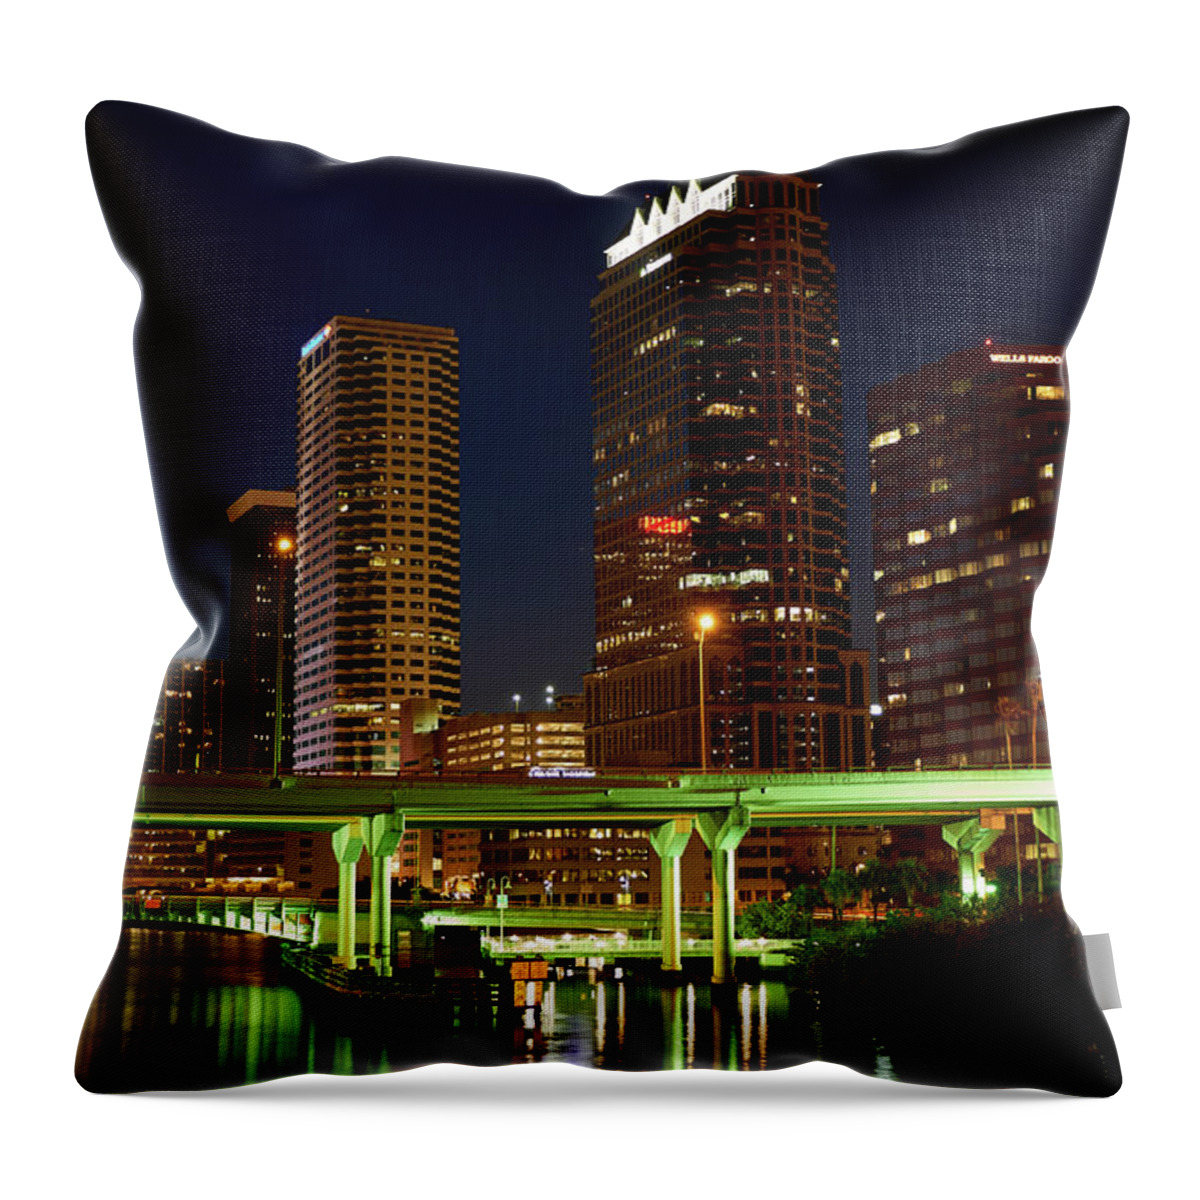 Lec Camera Club Throw Pillow featuring the photograph Blue Hour 3 by David Beebe